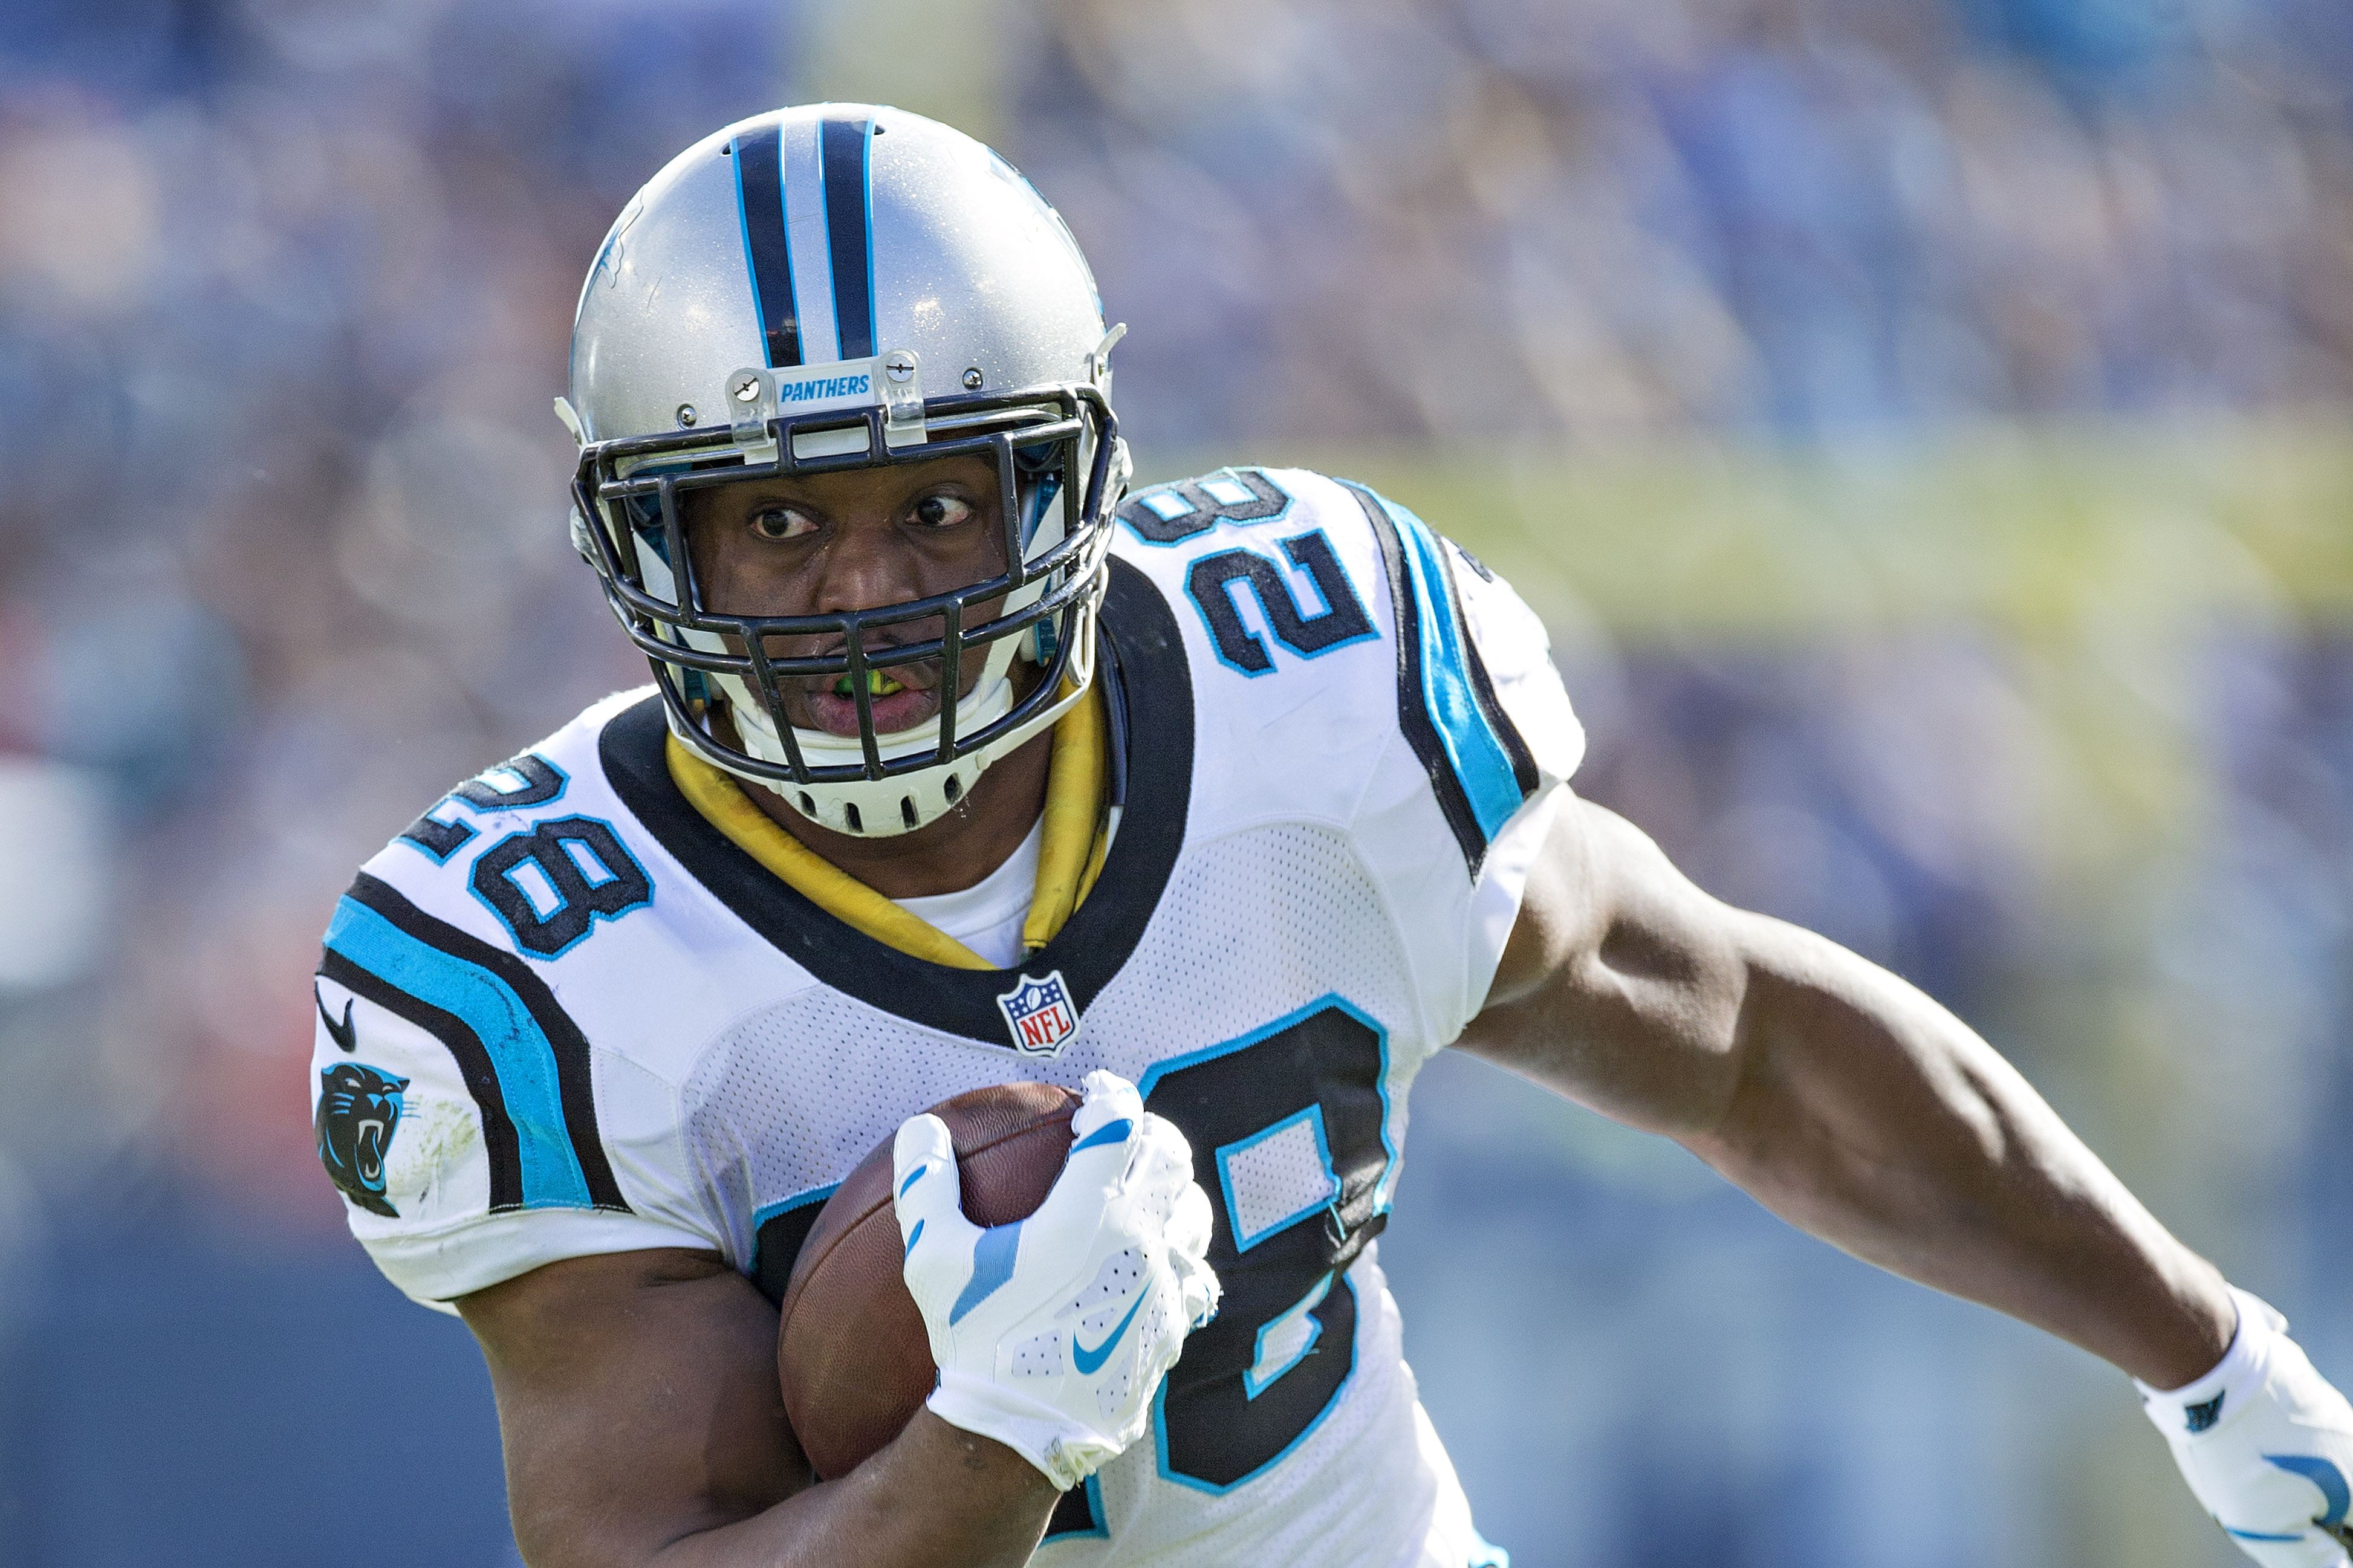 Jonathan Stewart makes a move during a game in 2016.